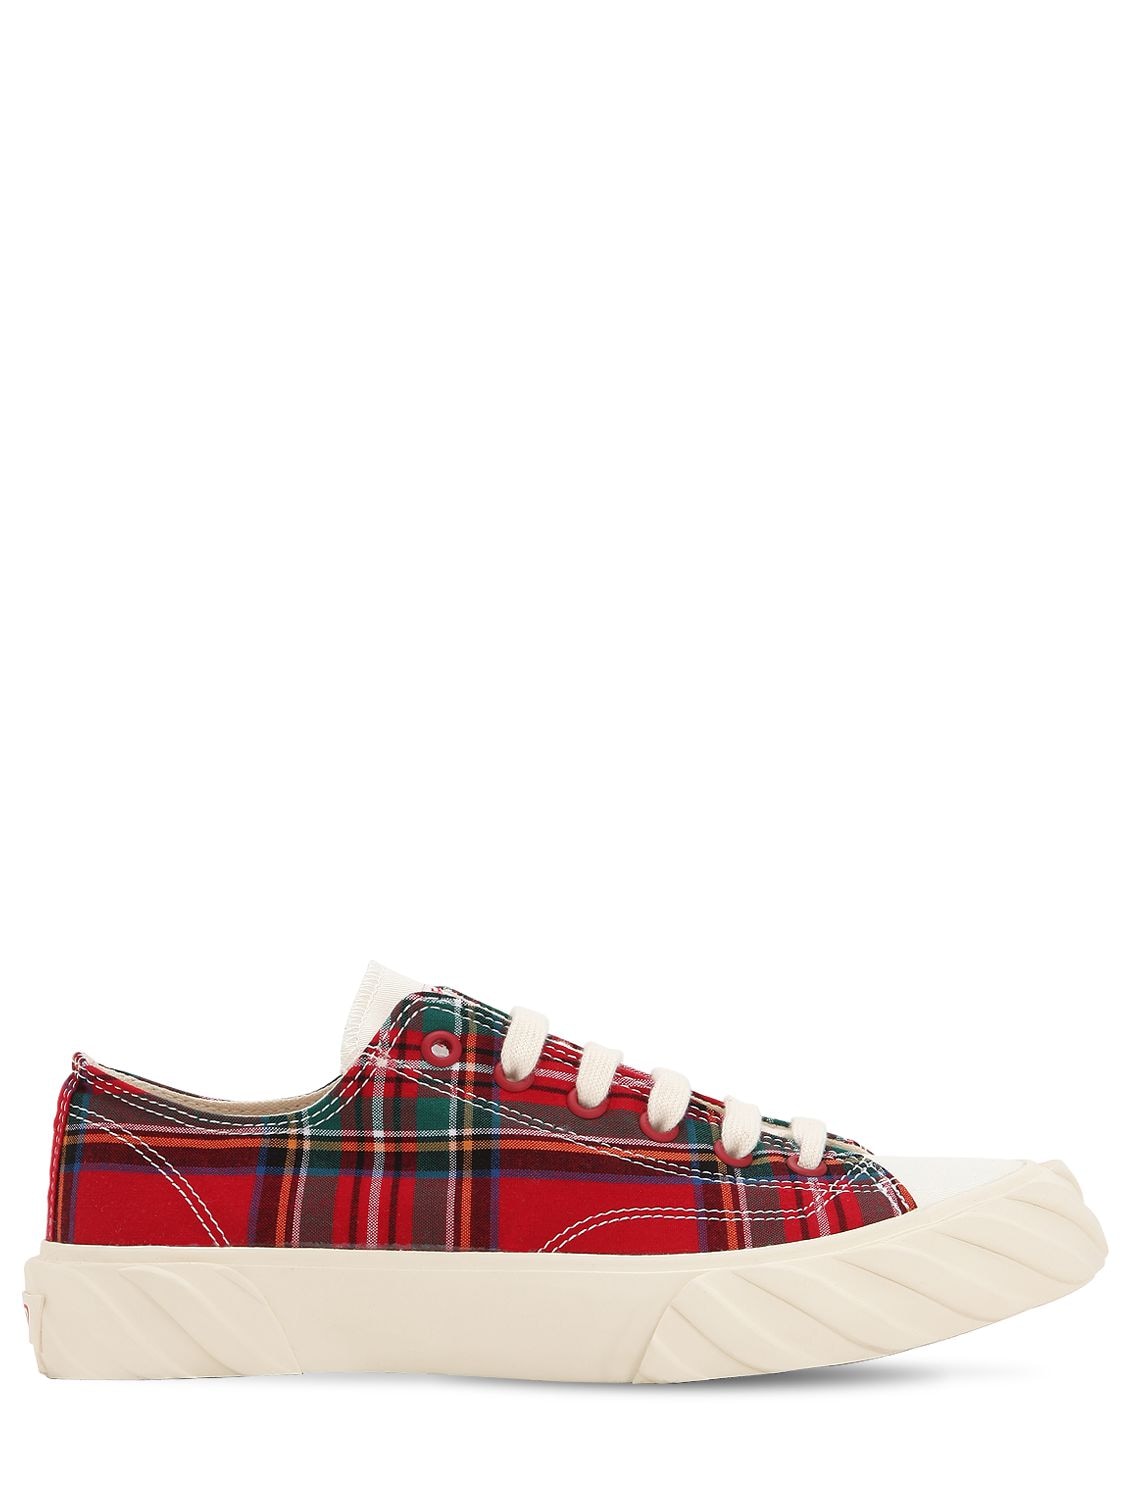 Age - Across To Genuine Era Age Cut Checked Cotton Canvas Sneakers In Red